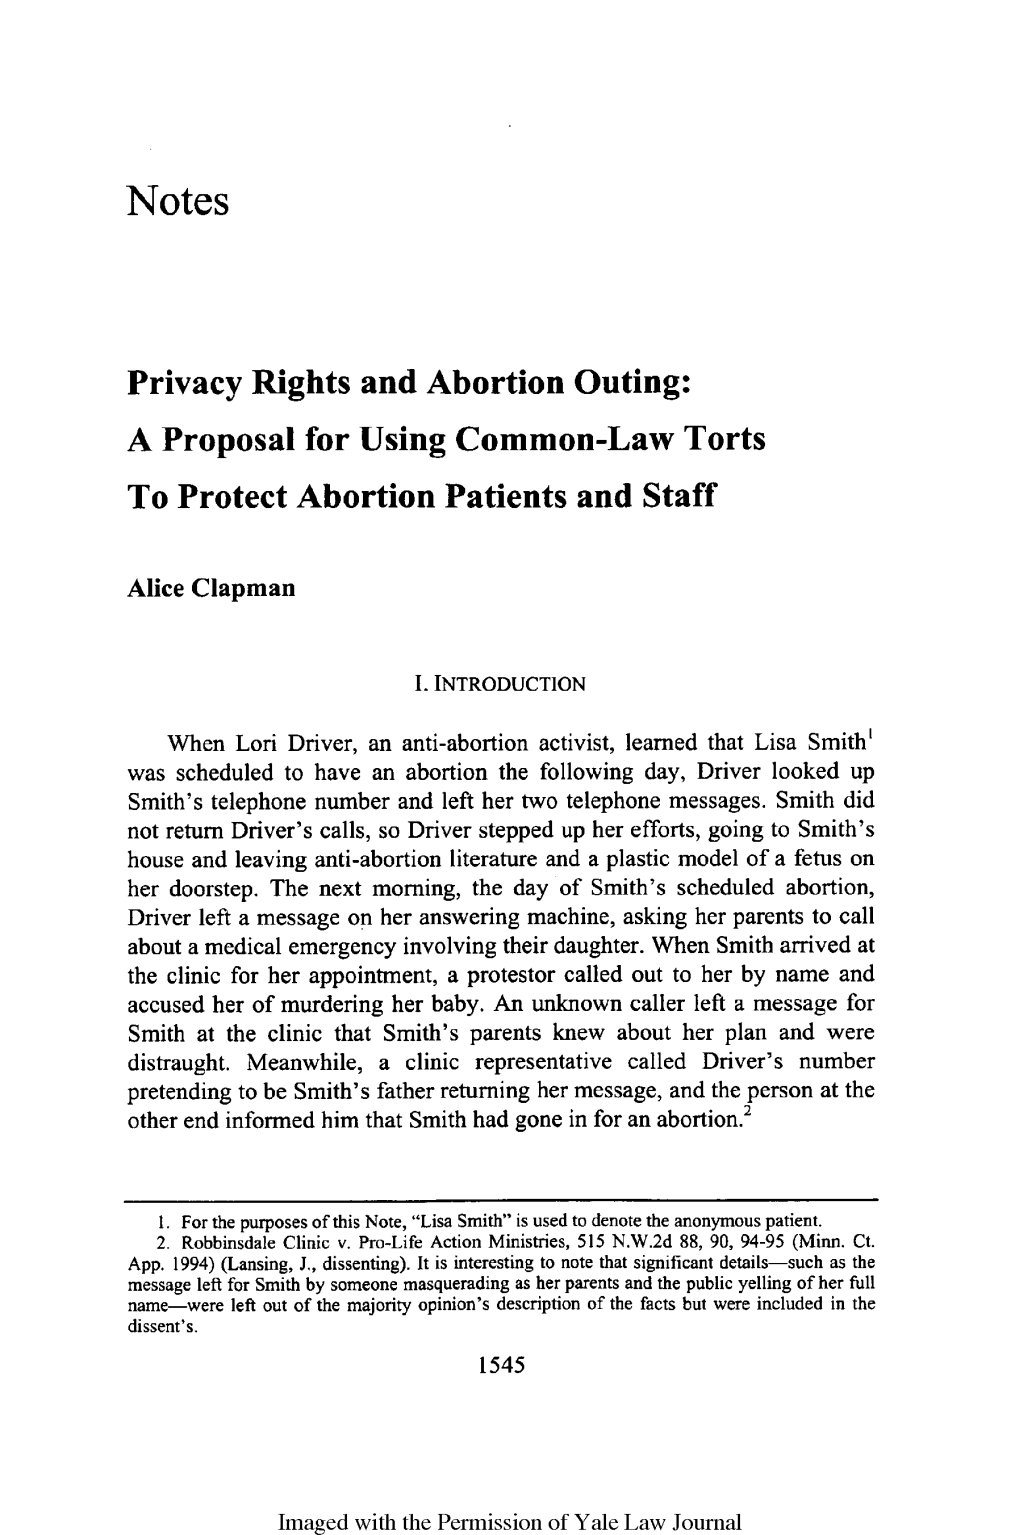 Privacy Rights and Abortion Outing: a Proposal for Using Common-Law Torts to Protect Abortion Patients and Staff